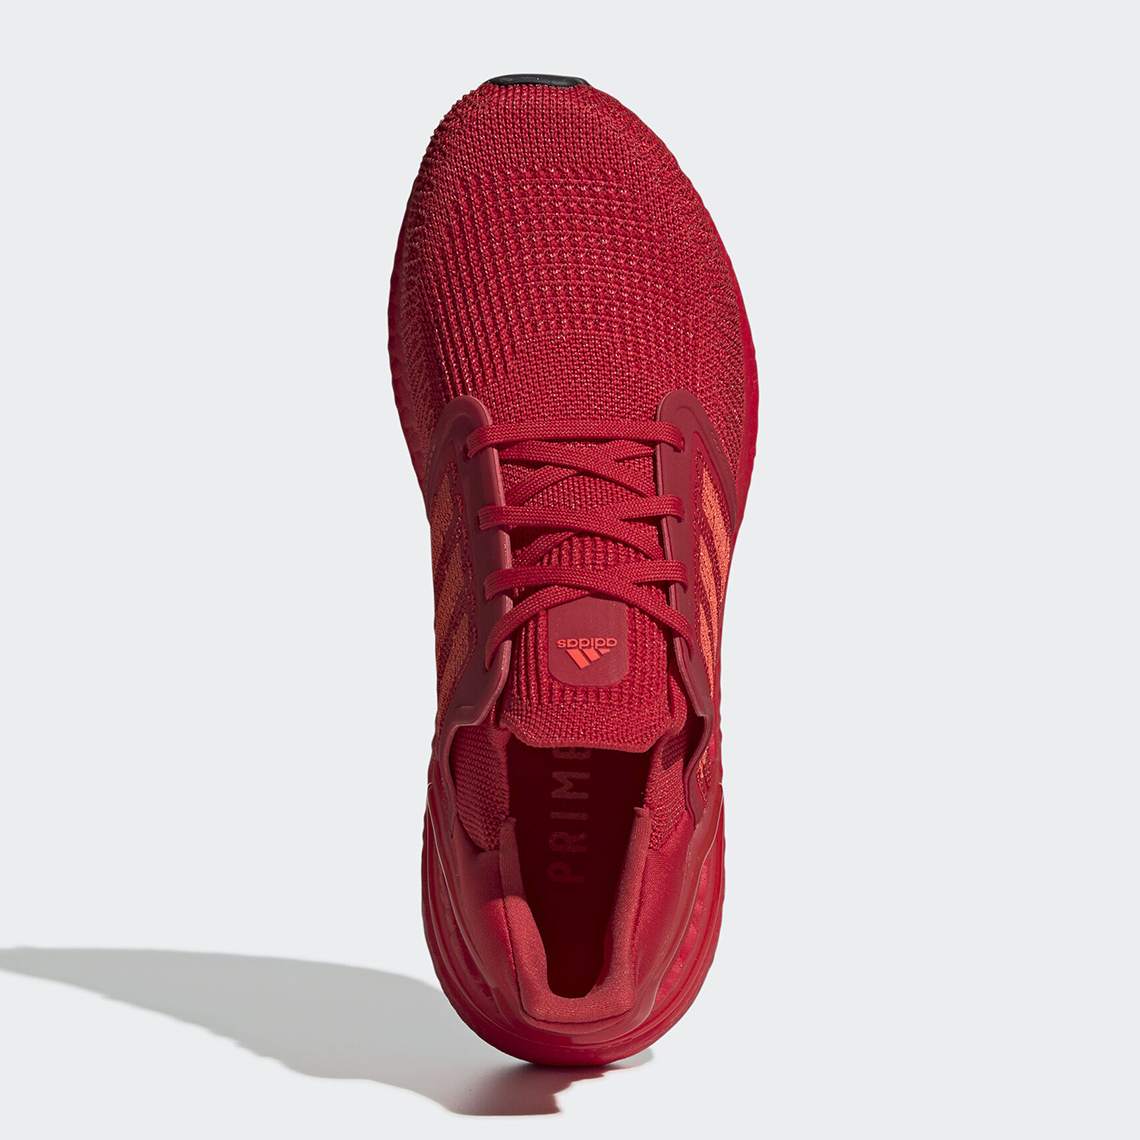 Adidas UltraBoost 2020 Receives &quot;Red October&quot; Makeover: Details